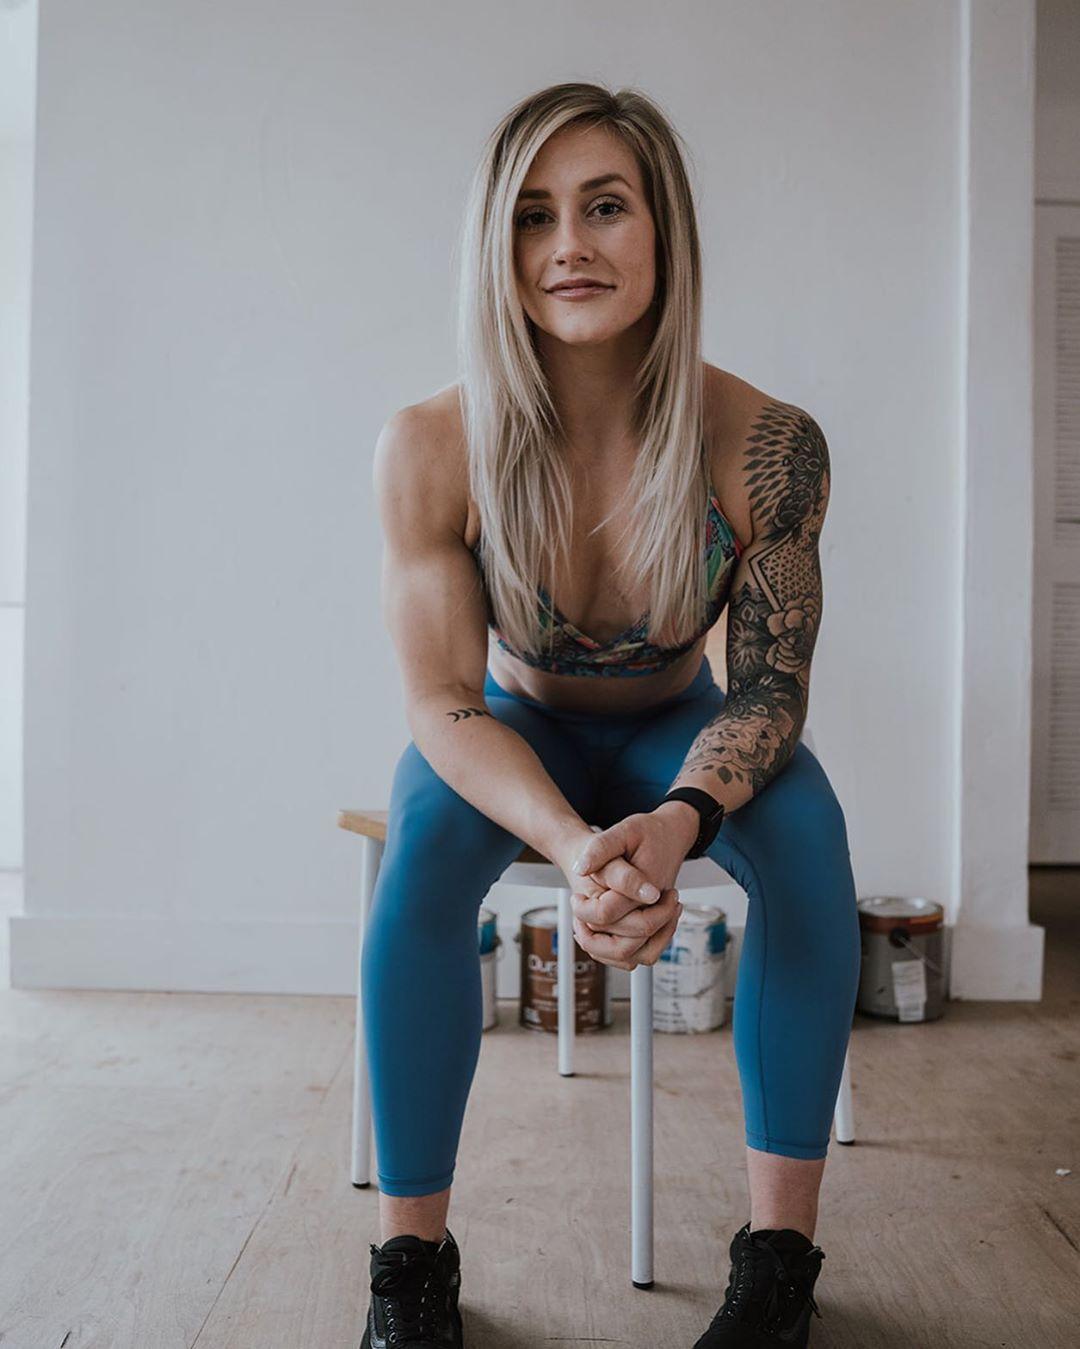 51 Hot Pictures Of Josie Hamming That Will Fill Your Heart With Joy A Success 11